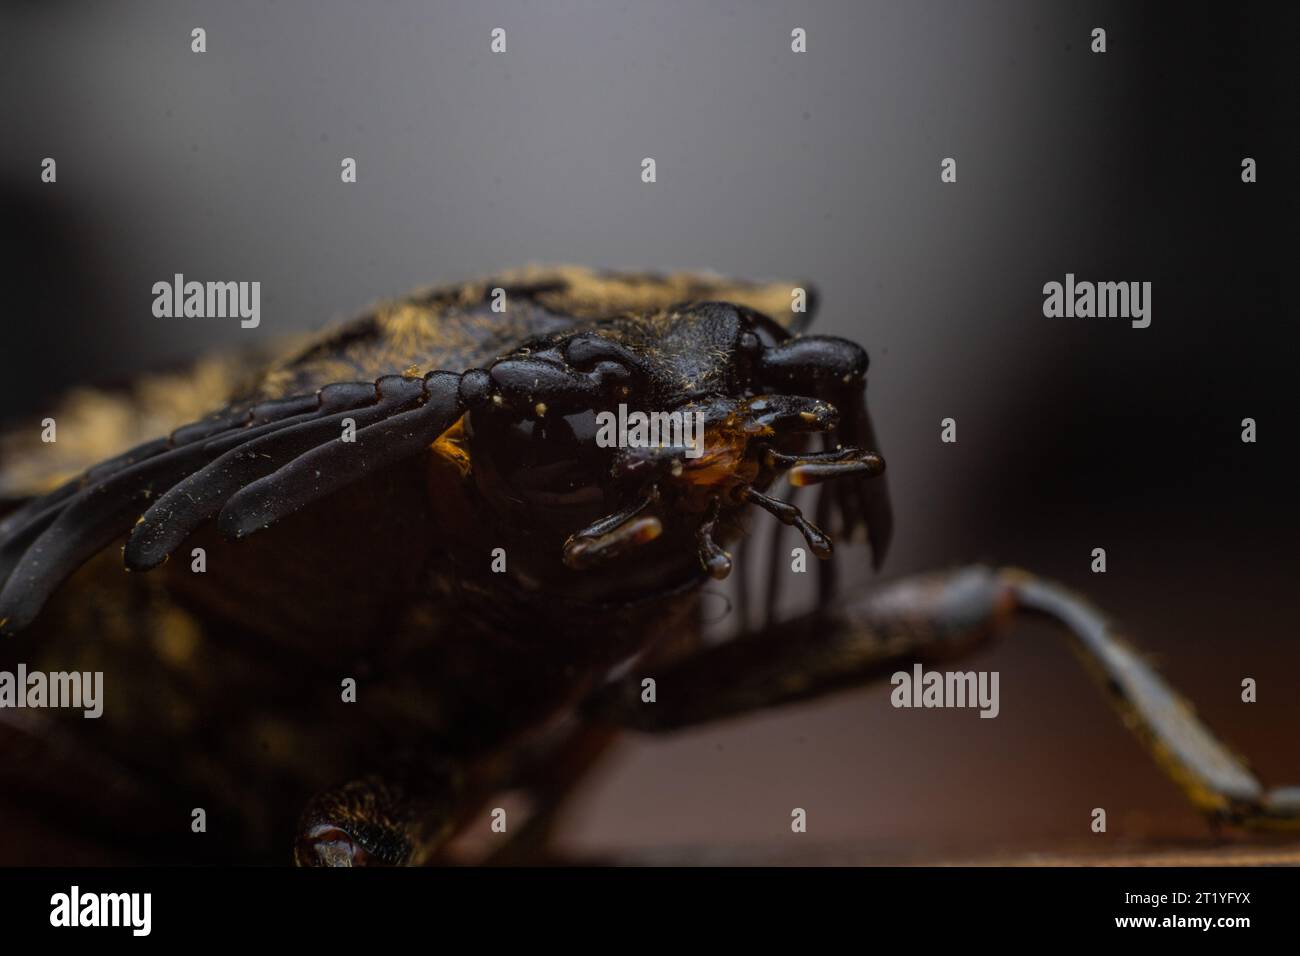 The face of the click beetle of oxynopterus genus taken under macro photography style Stock Photo